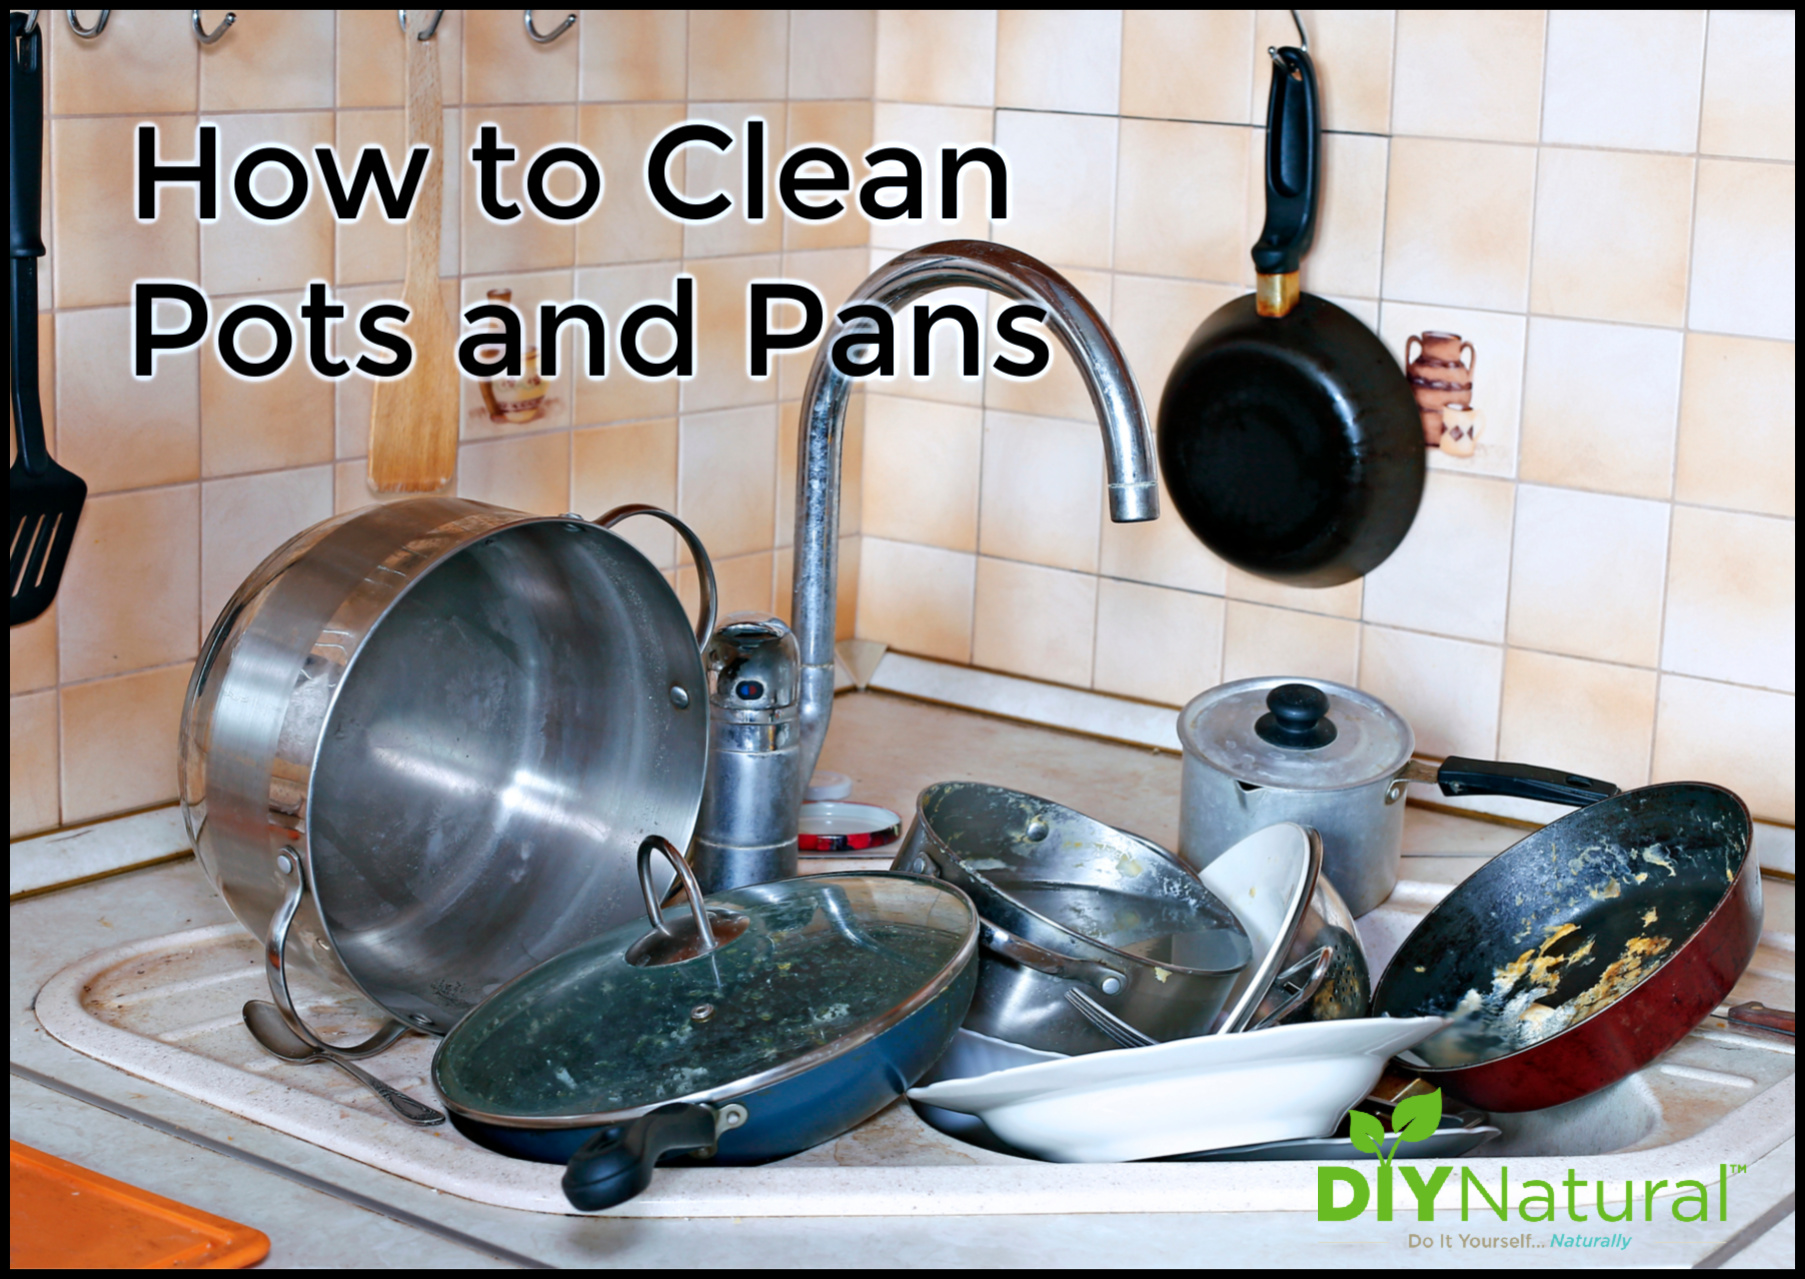 How to Clean Pots and Pans: Learn What Works and What Does Not